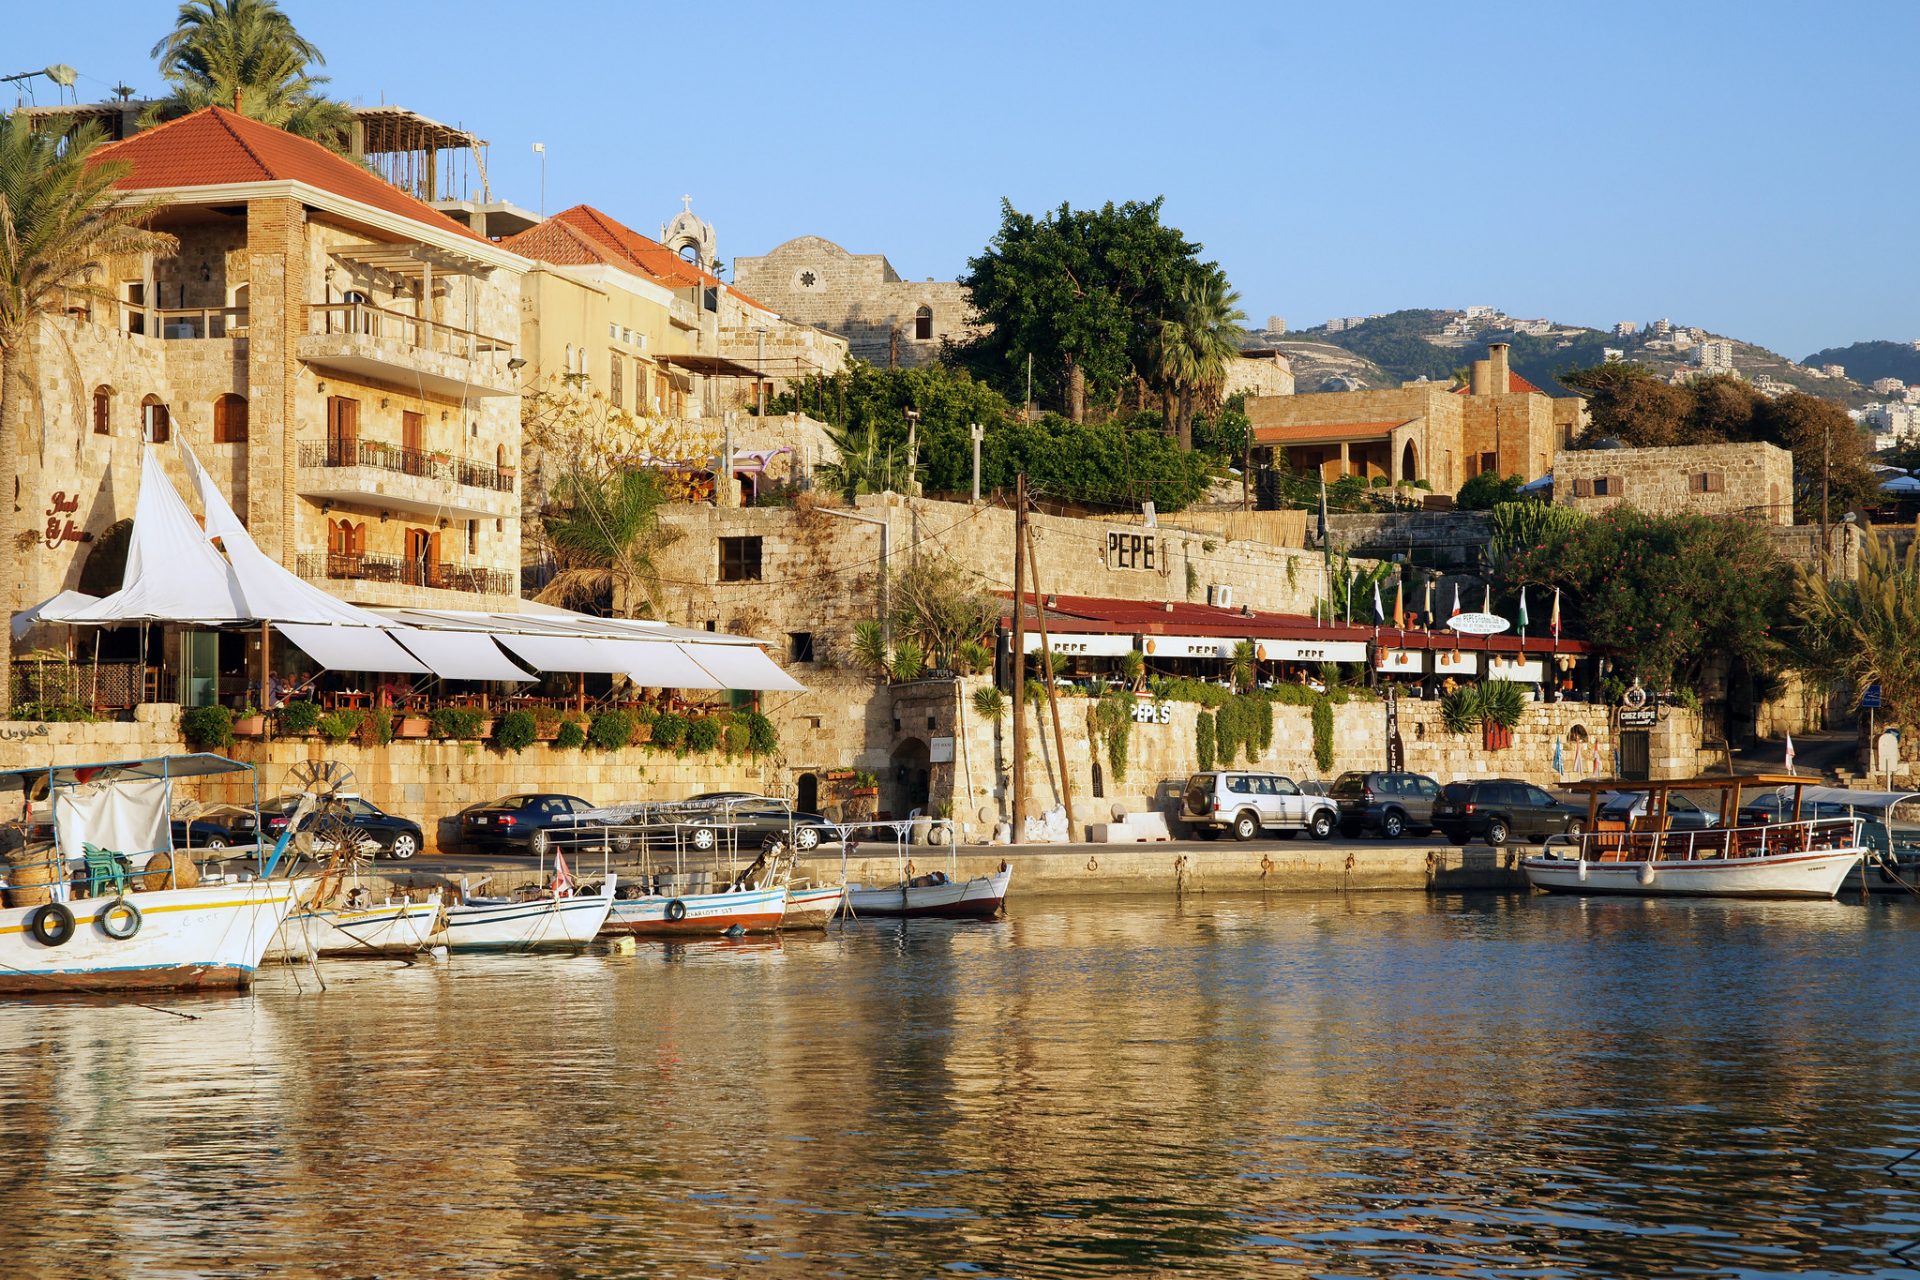 A photograph of the Byblos Port.